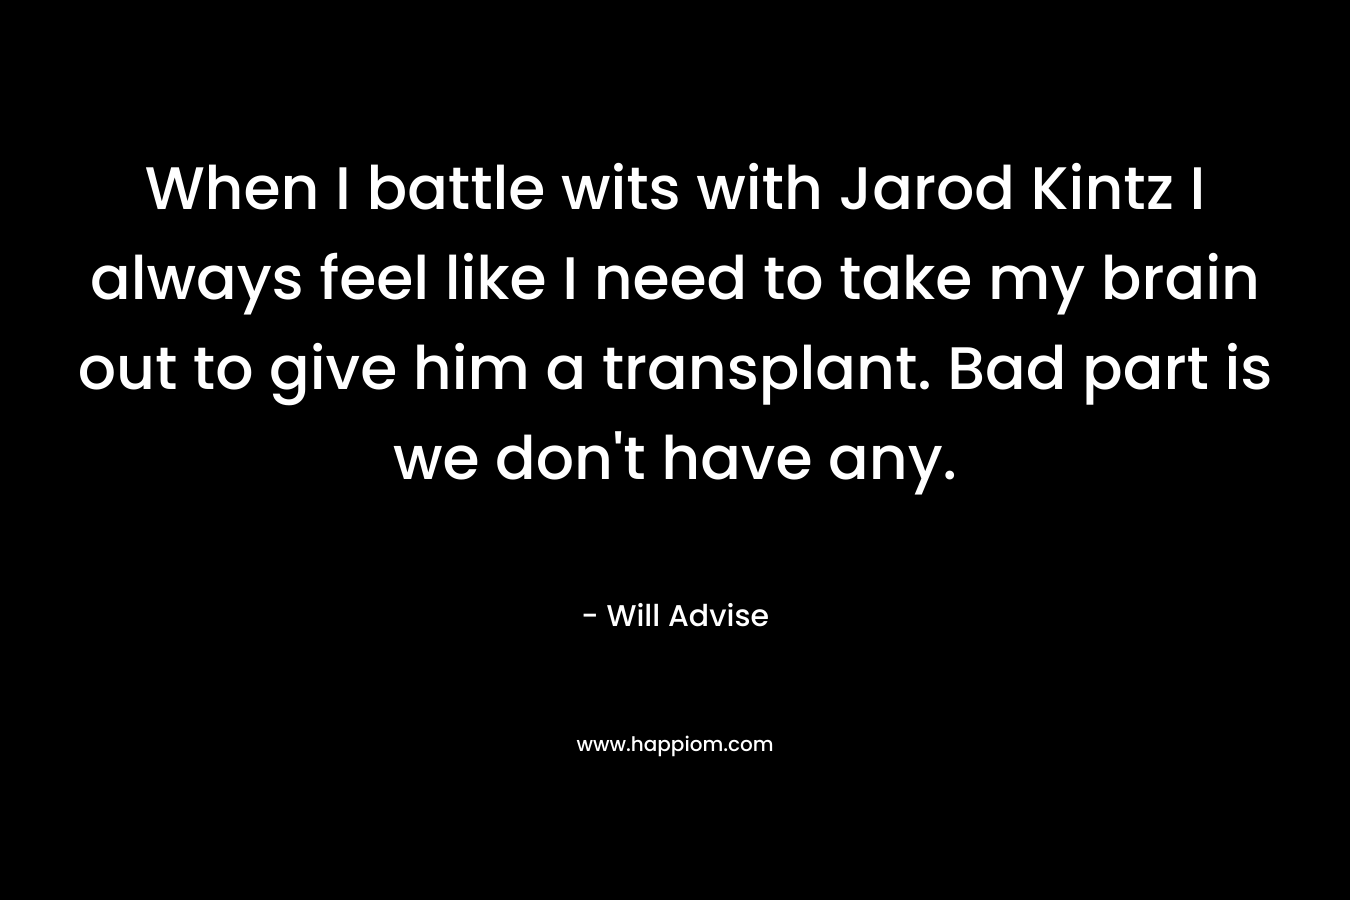 When I battle wits with Jarod Kintz I always feel like I need to take my brain out to give him a transplant. Bad part is we don’t have any. – Will Advise